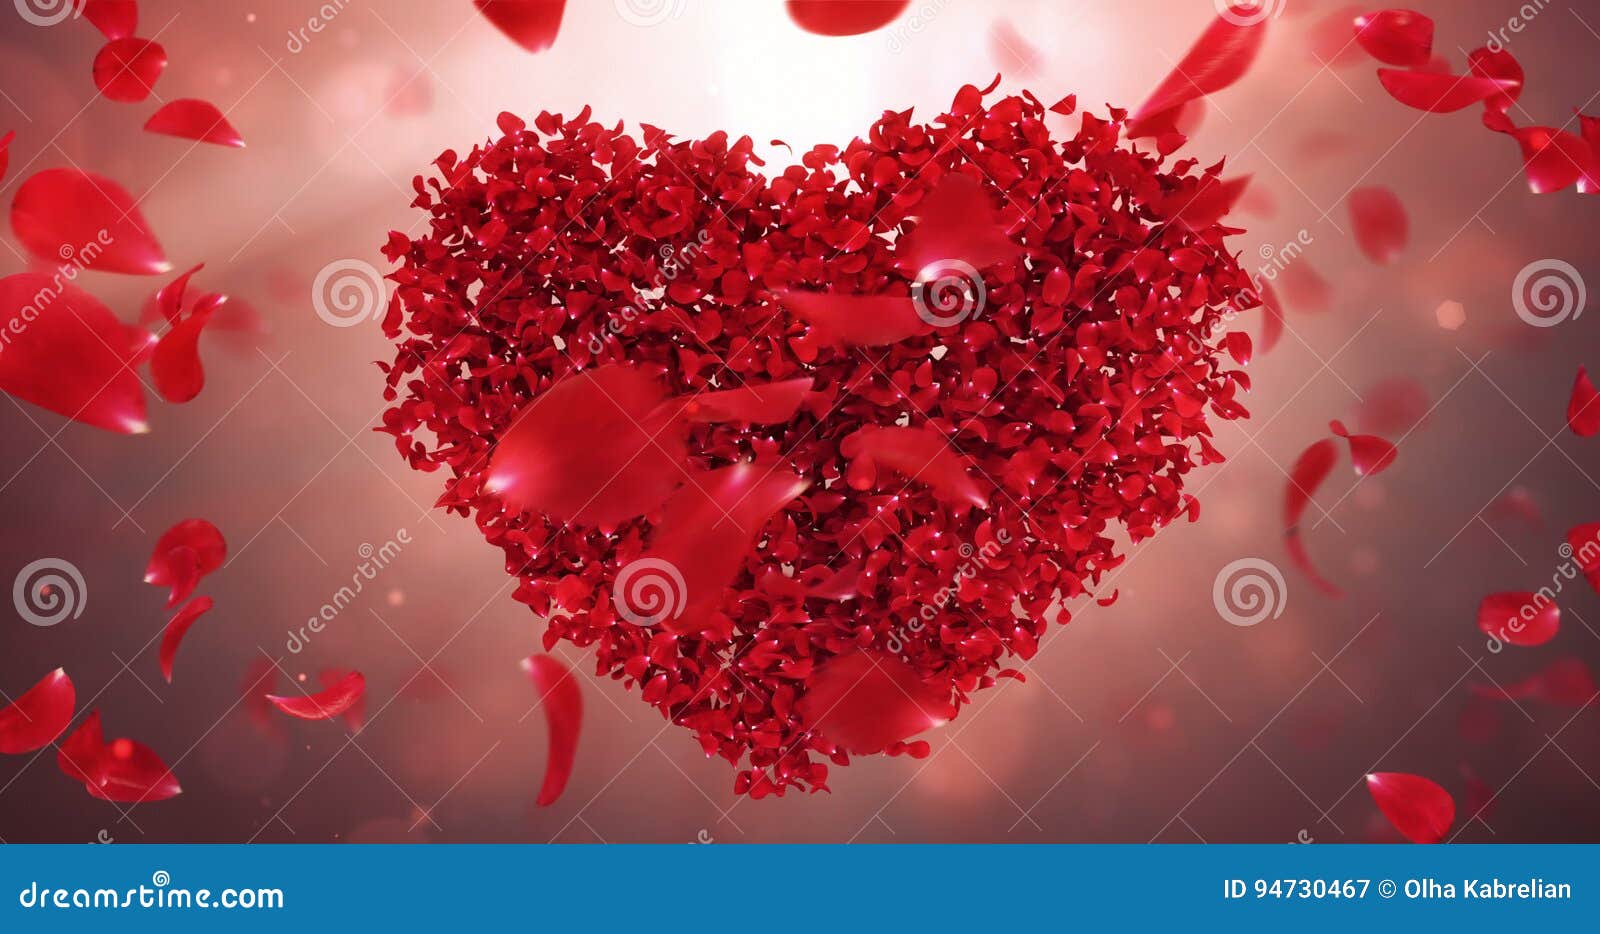 Whirl Rotating Red Rose Flower Petals in Lovely Heart Shape Background Loop  4k Stock Video - Video of holiday, petals: 94730467